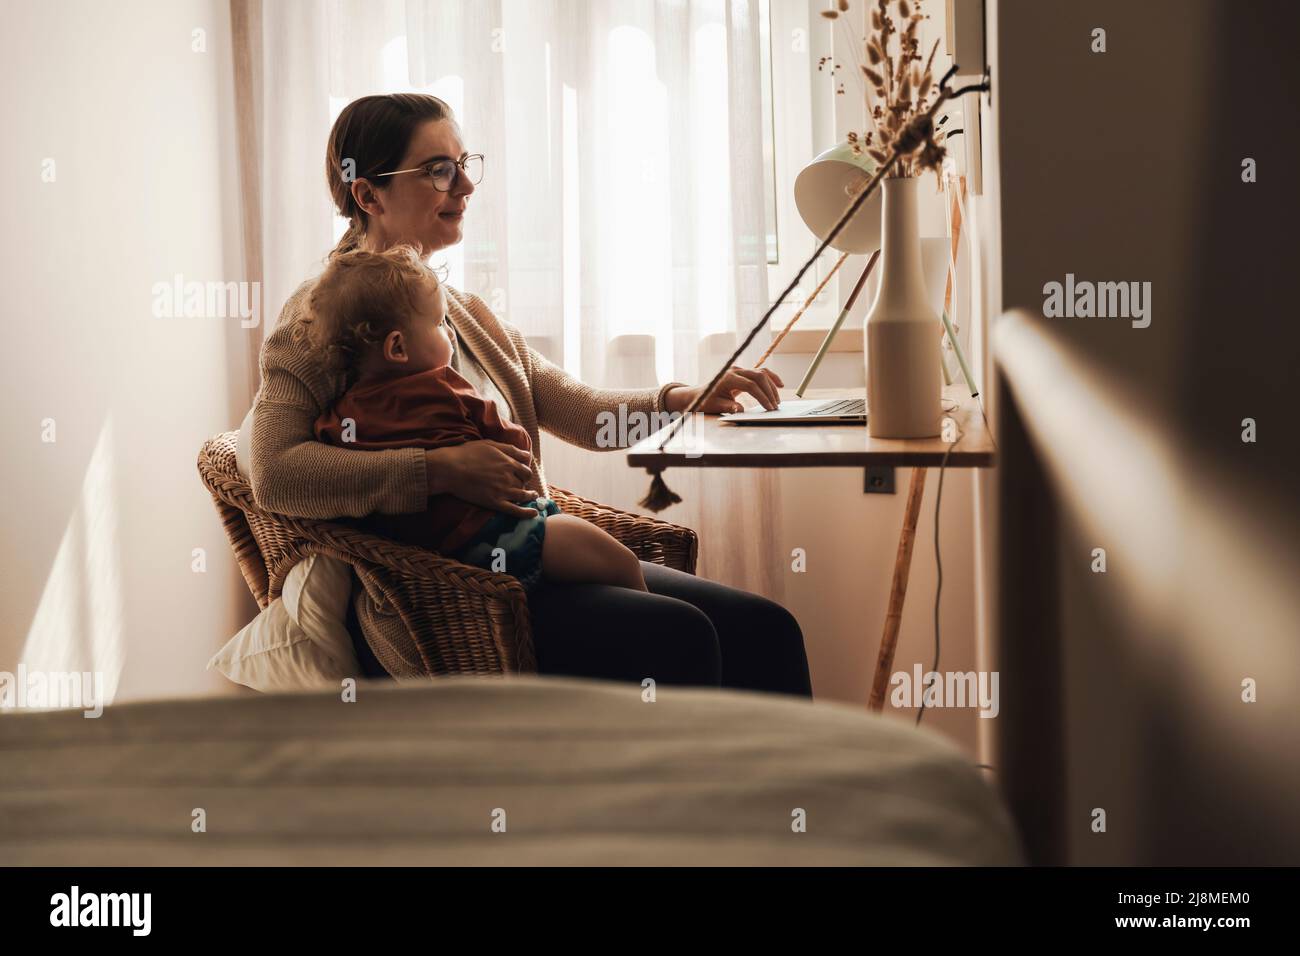 Busy woman working at home with a baby in the lap Stock Photo